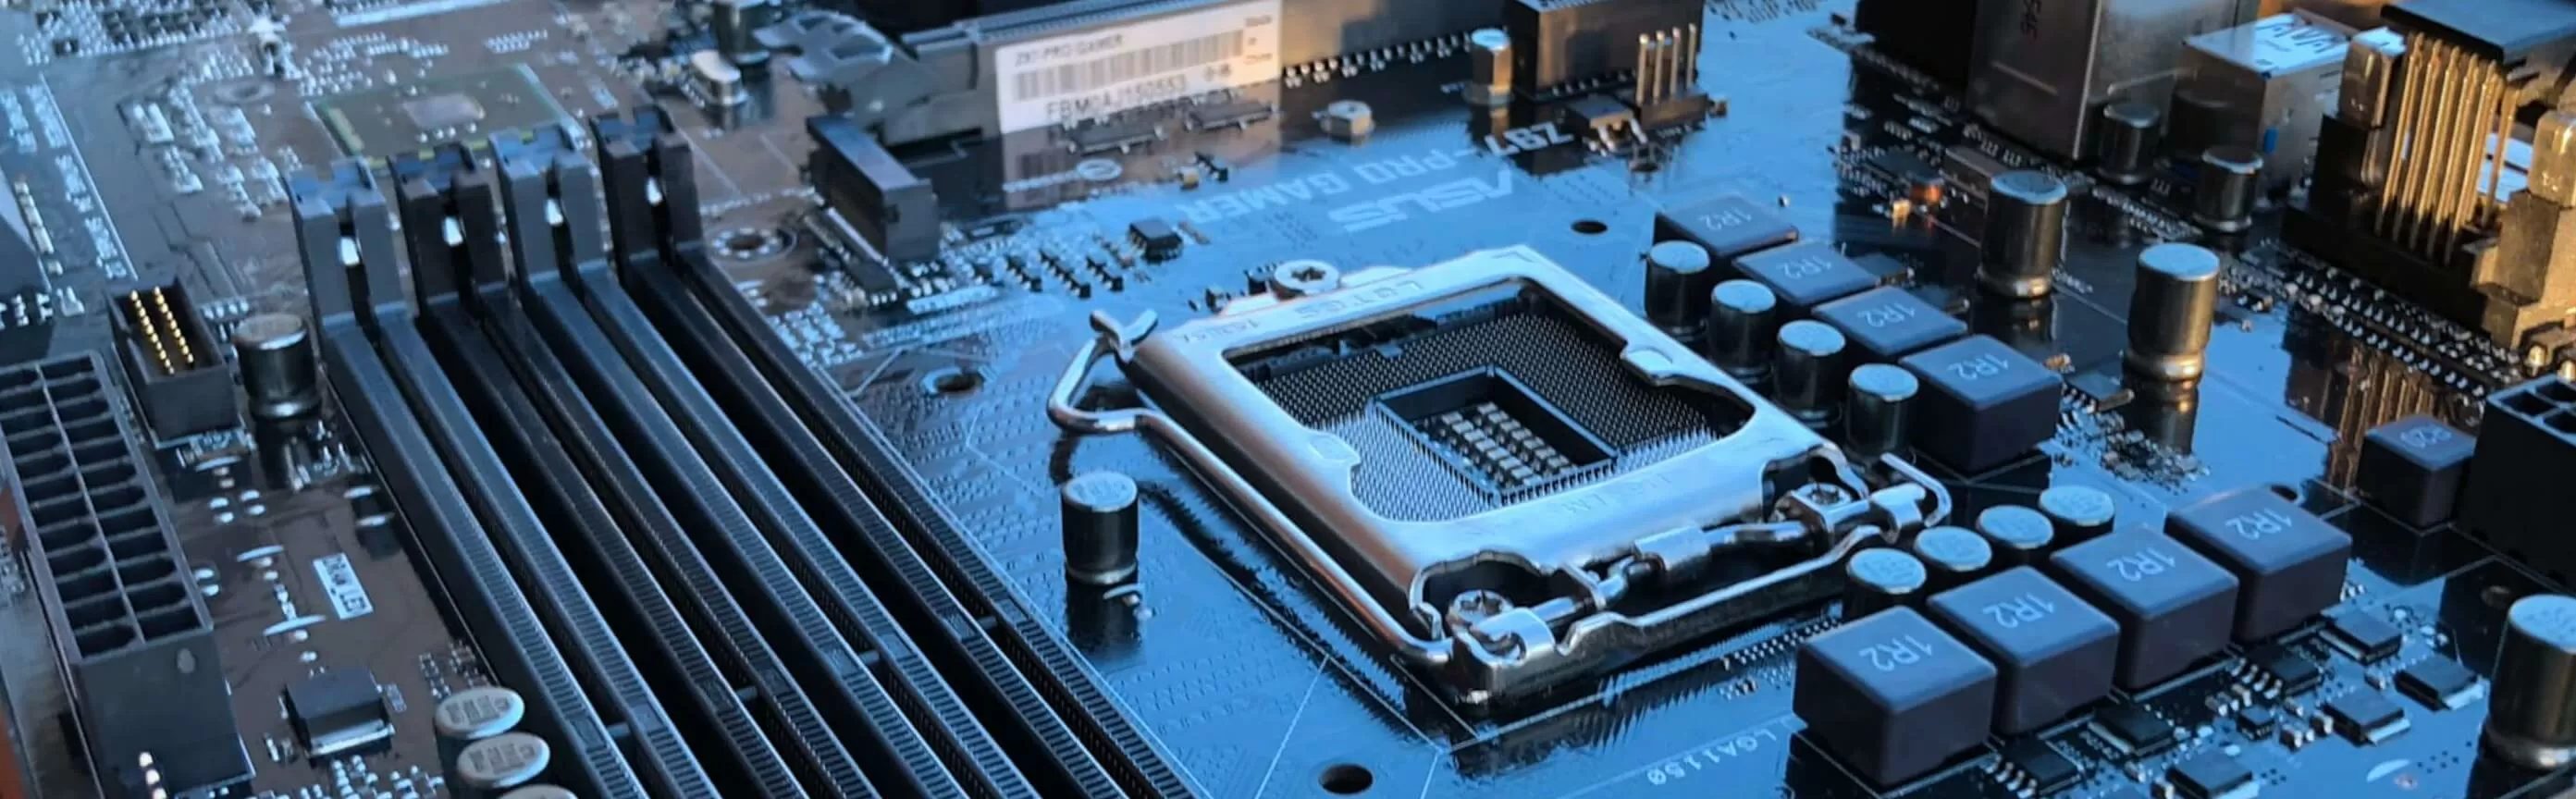 Anatomy of a Motherboard | TechSpot